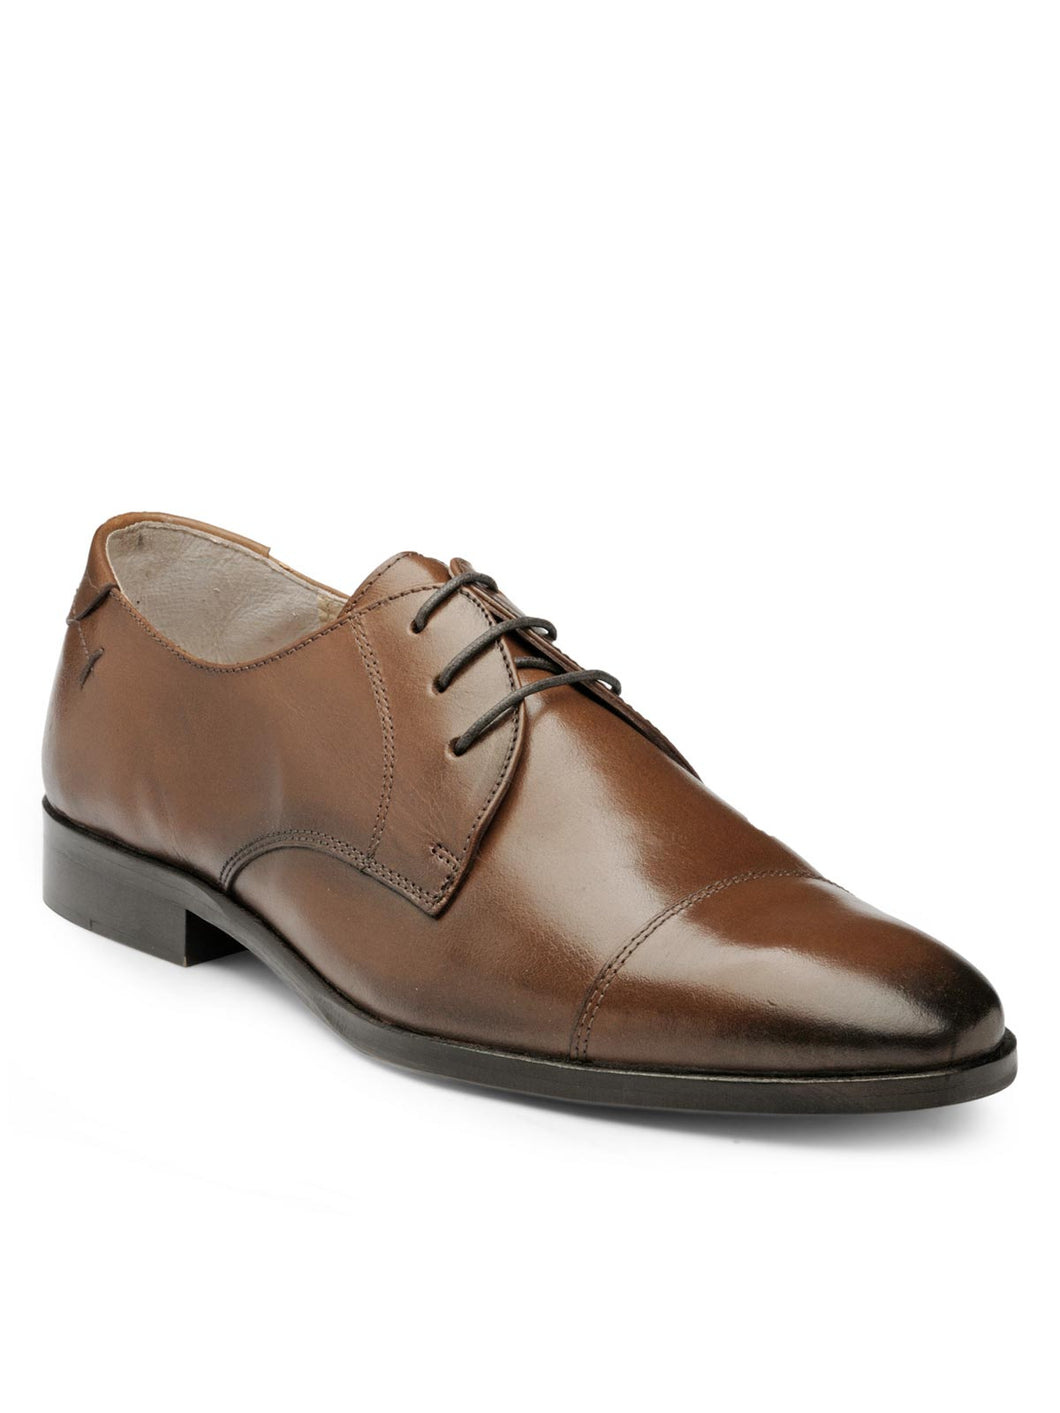 Teakwood Genuine Leather Derby Shoes Shoes